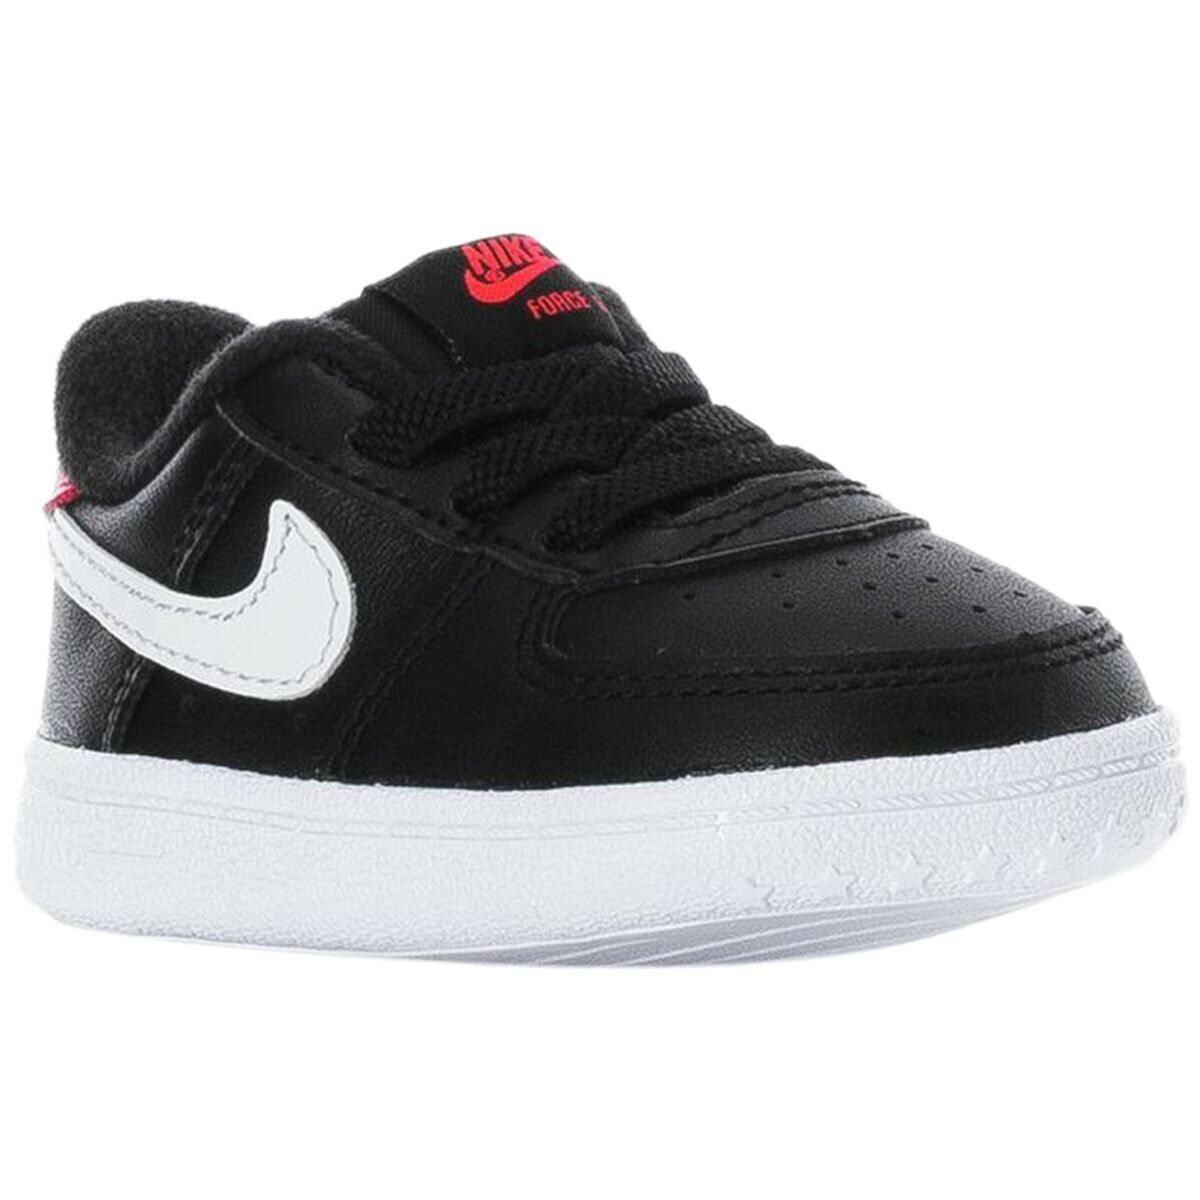 Nike Force 1 Crib Infant Shoes Black CK2201 003 Baby Size 3c Brand New With Box